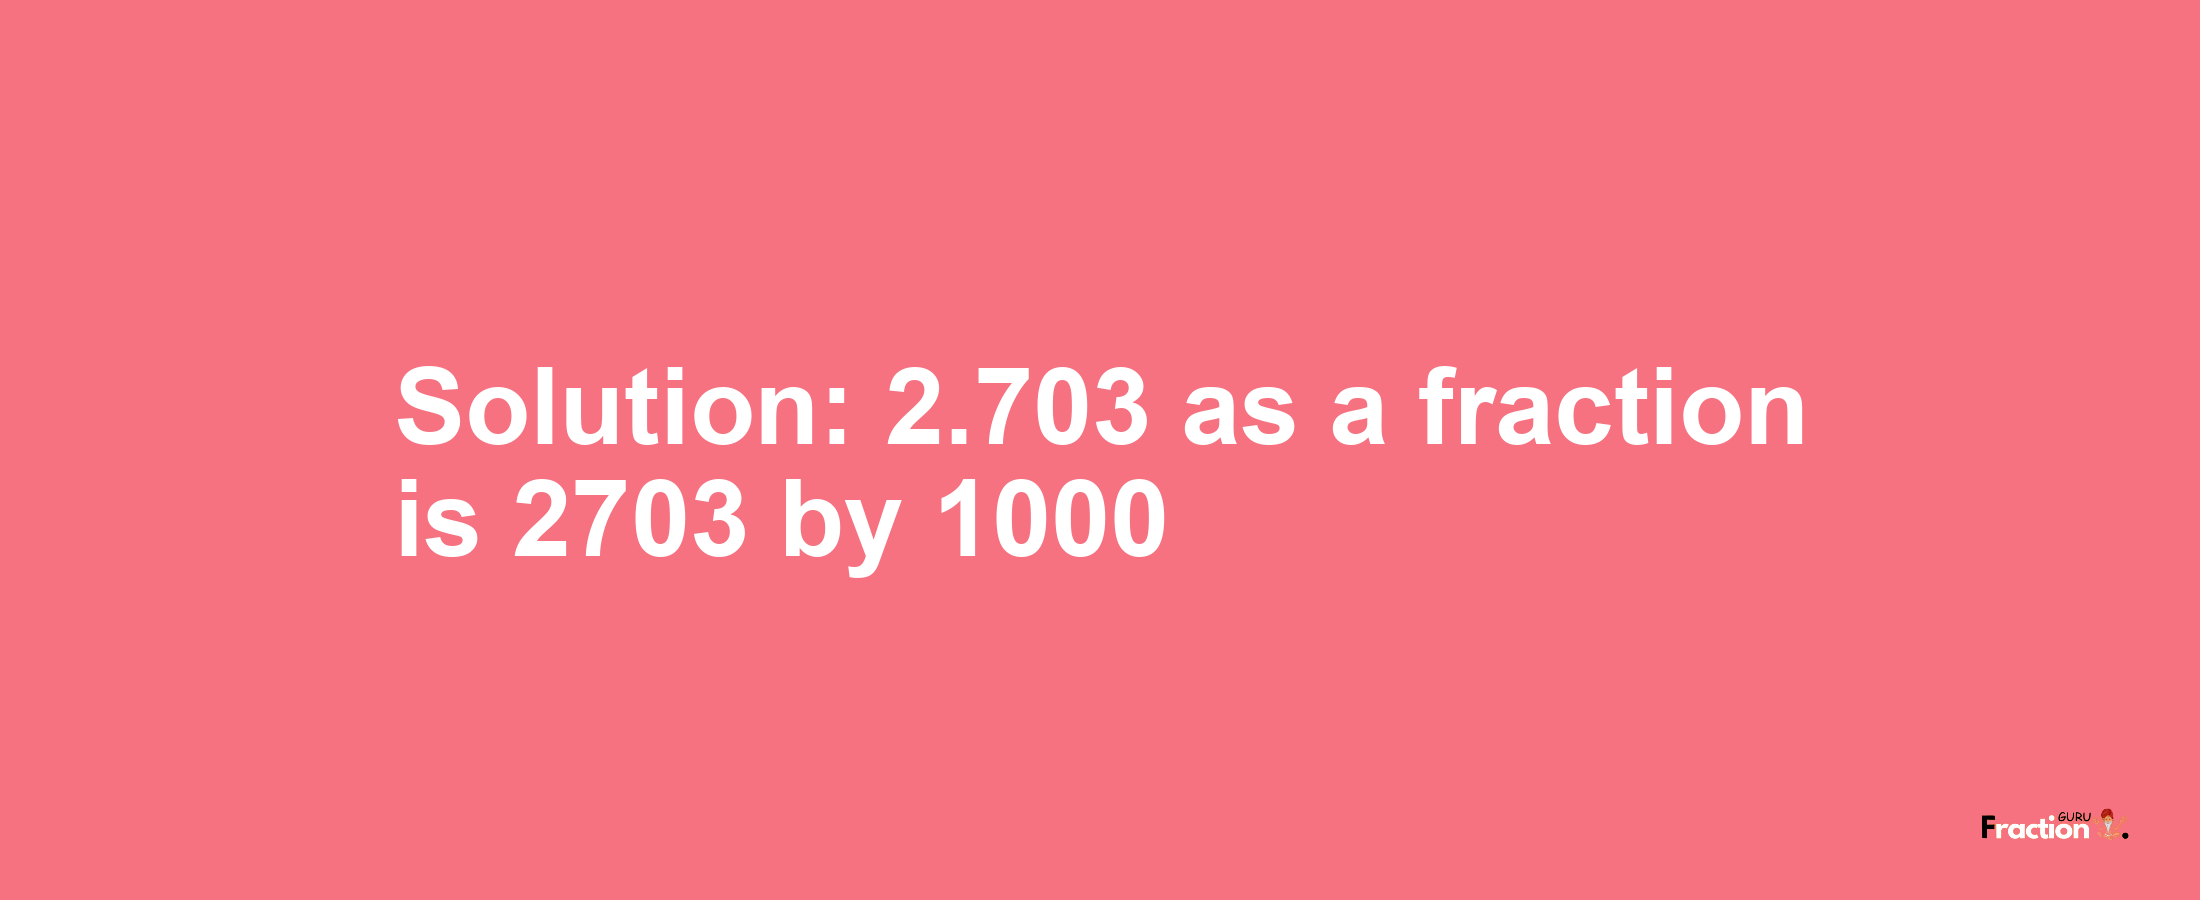 Solution:2.703 as a fraction is 2703/1000